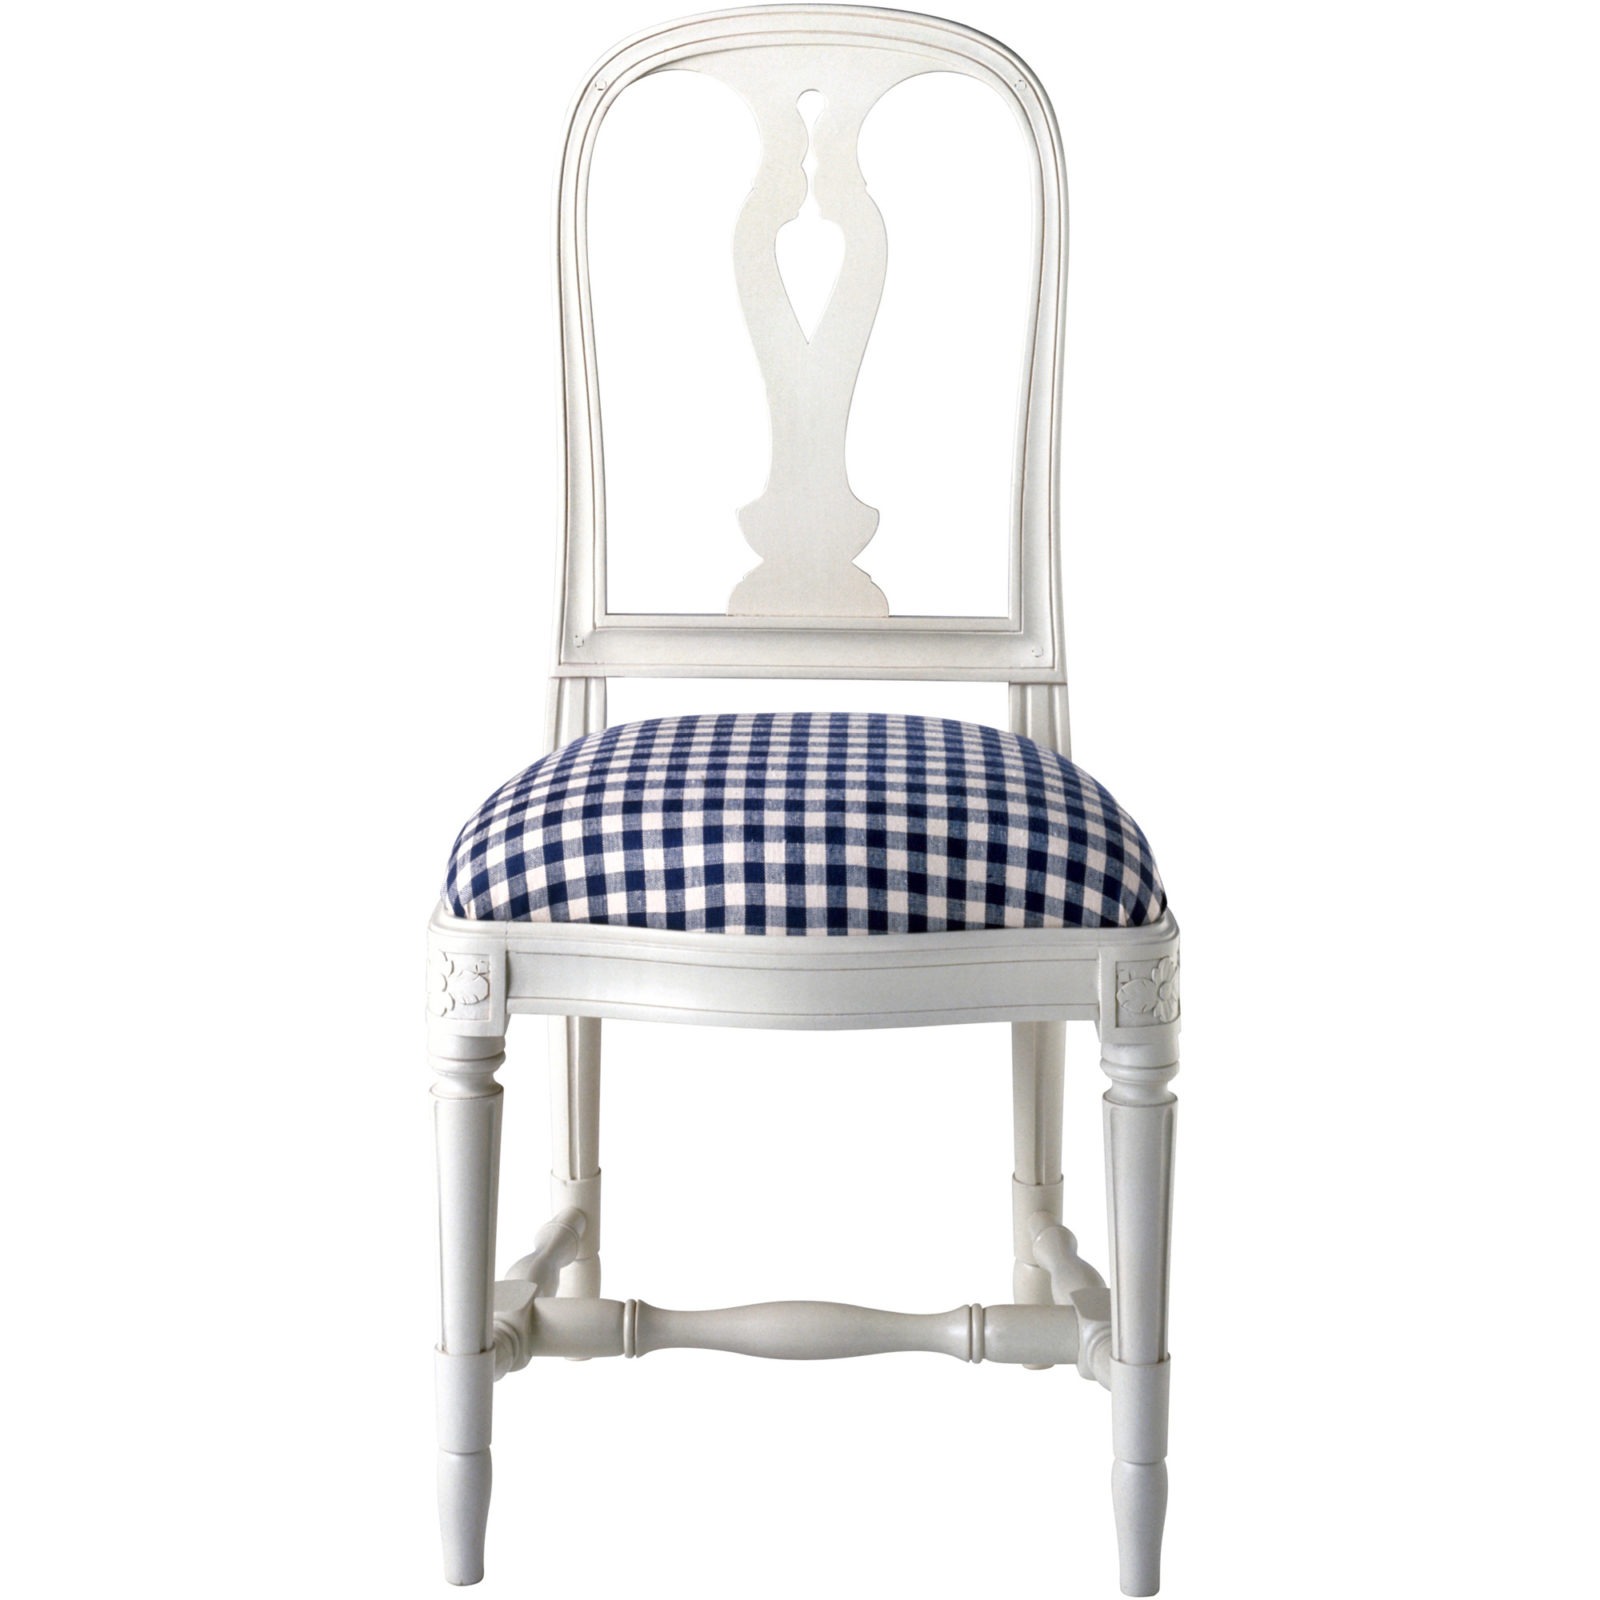 White chair in Gustavian style with black and white chequered seat cushion, HALLUNDA.